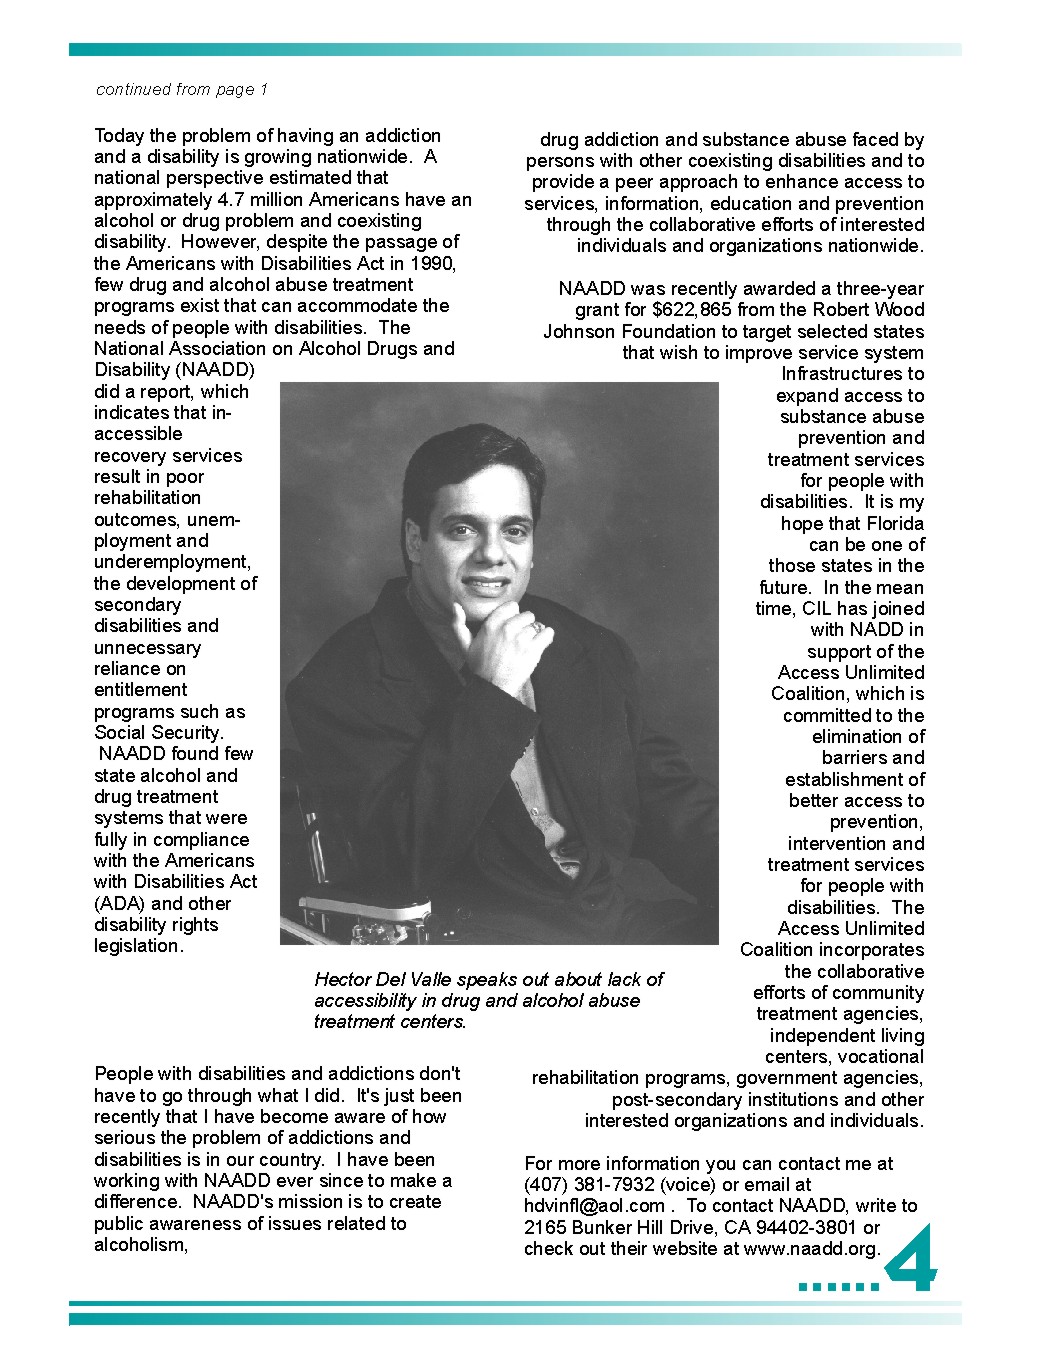 A photocopy of an article written by Hector Del Valle. An old image of Hector is surrounded by the text of the article he wrote. 